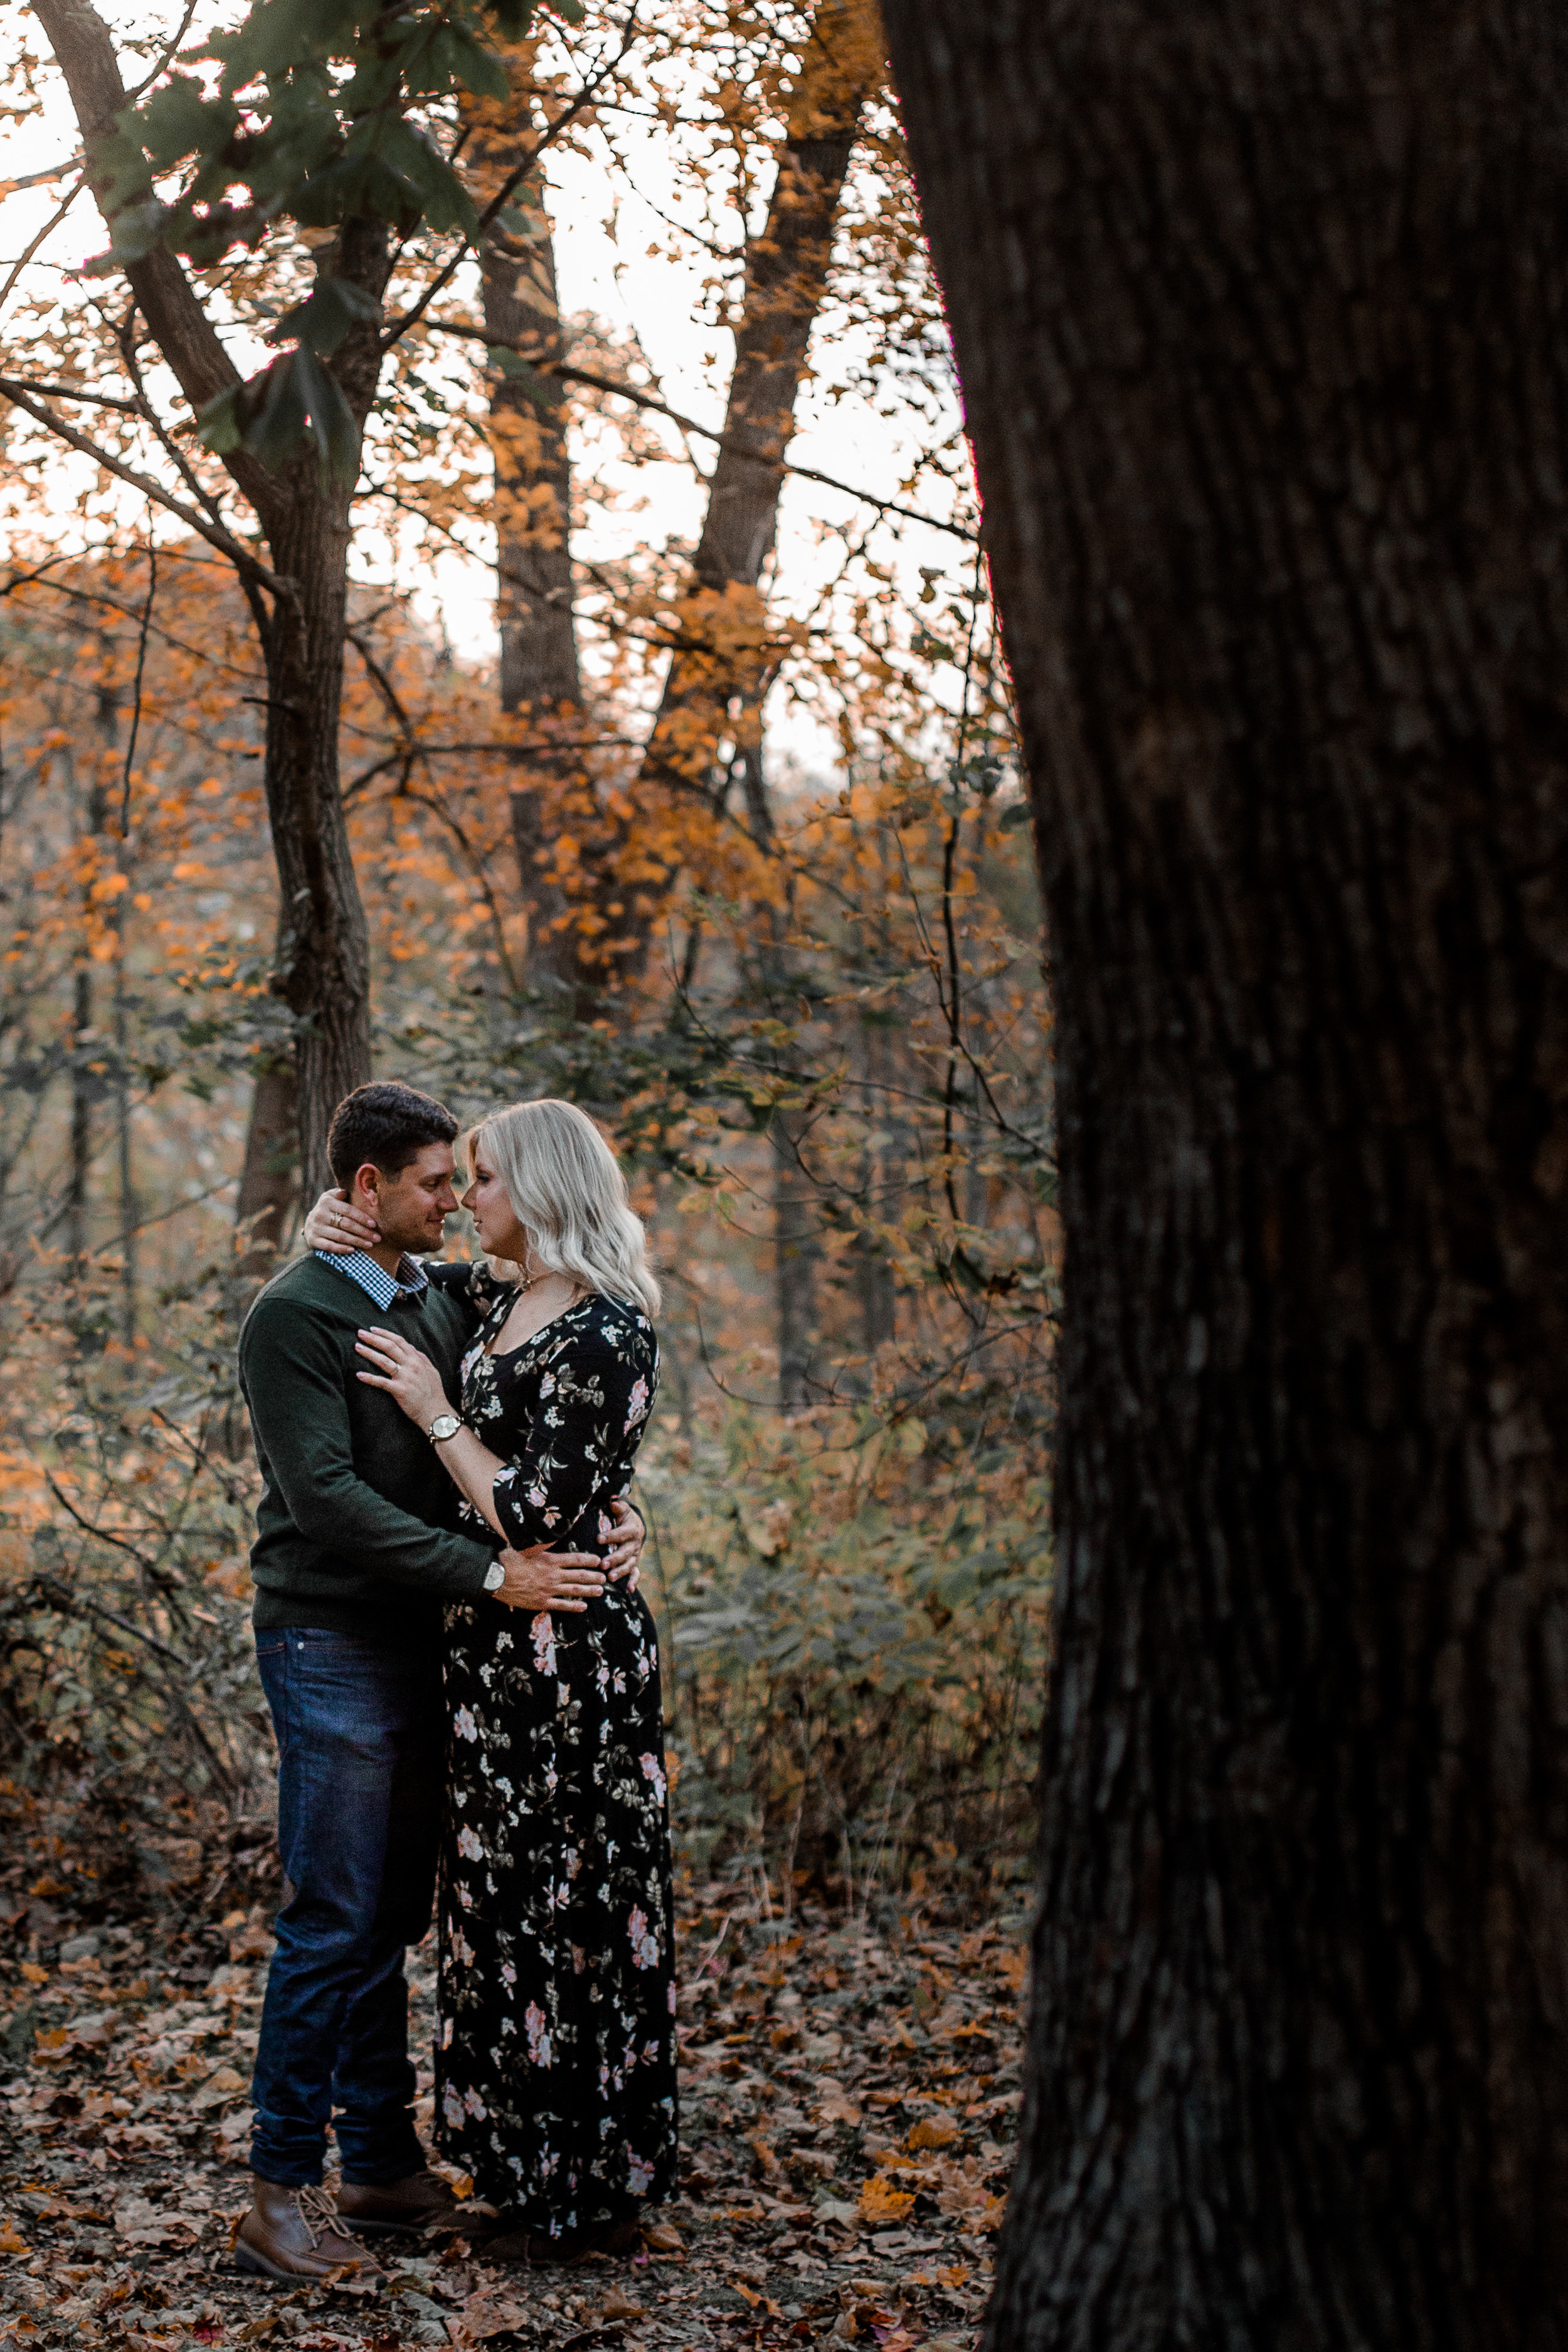 nicole-daacke-photography-carefree-bohemian-lancaster-pa-pennsylvania-engagement-photos-engagement-session-golden-sunset-adventure-session-in-lancaster-pa-lancaster-pa-outdoor-wedding-photographer-56.jpg